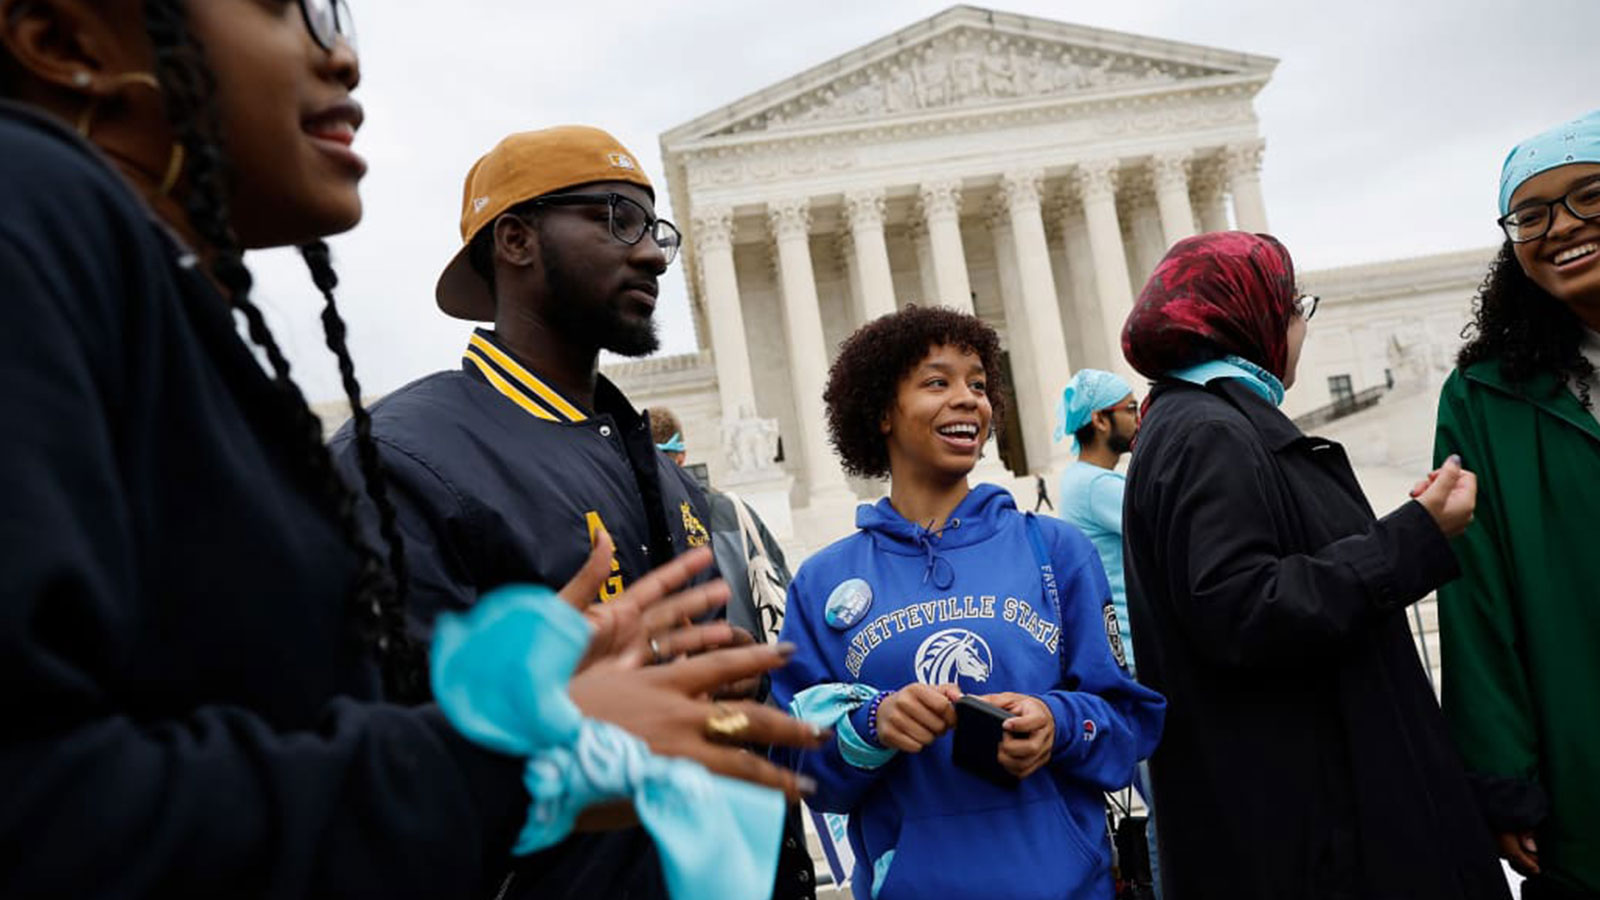 Affirmative Action Is Gutted. Now’s the Time for Reparations